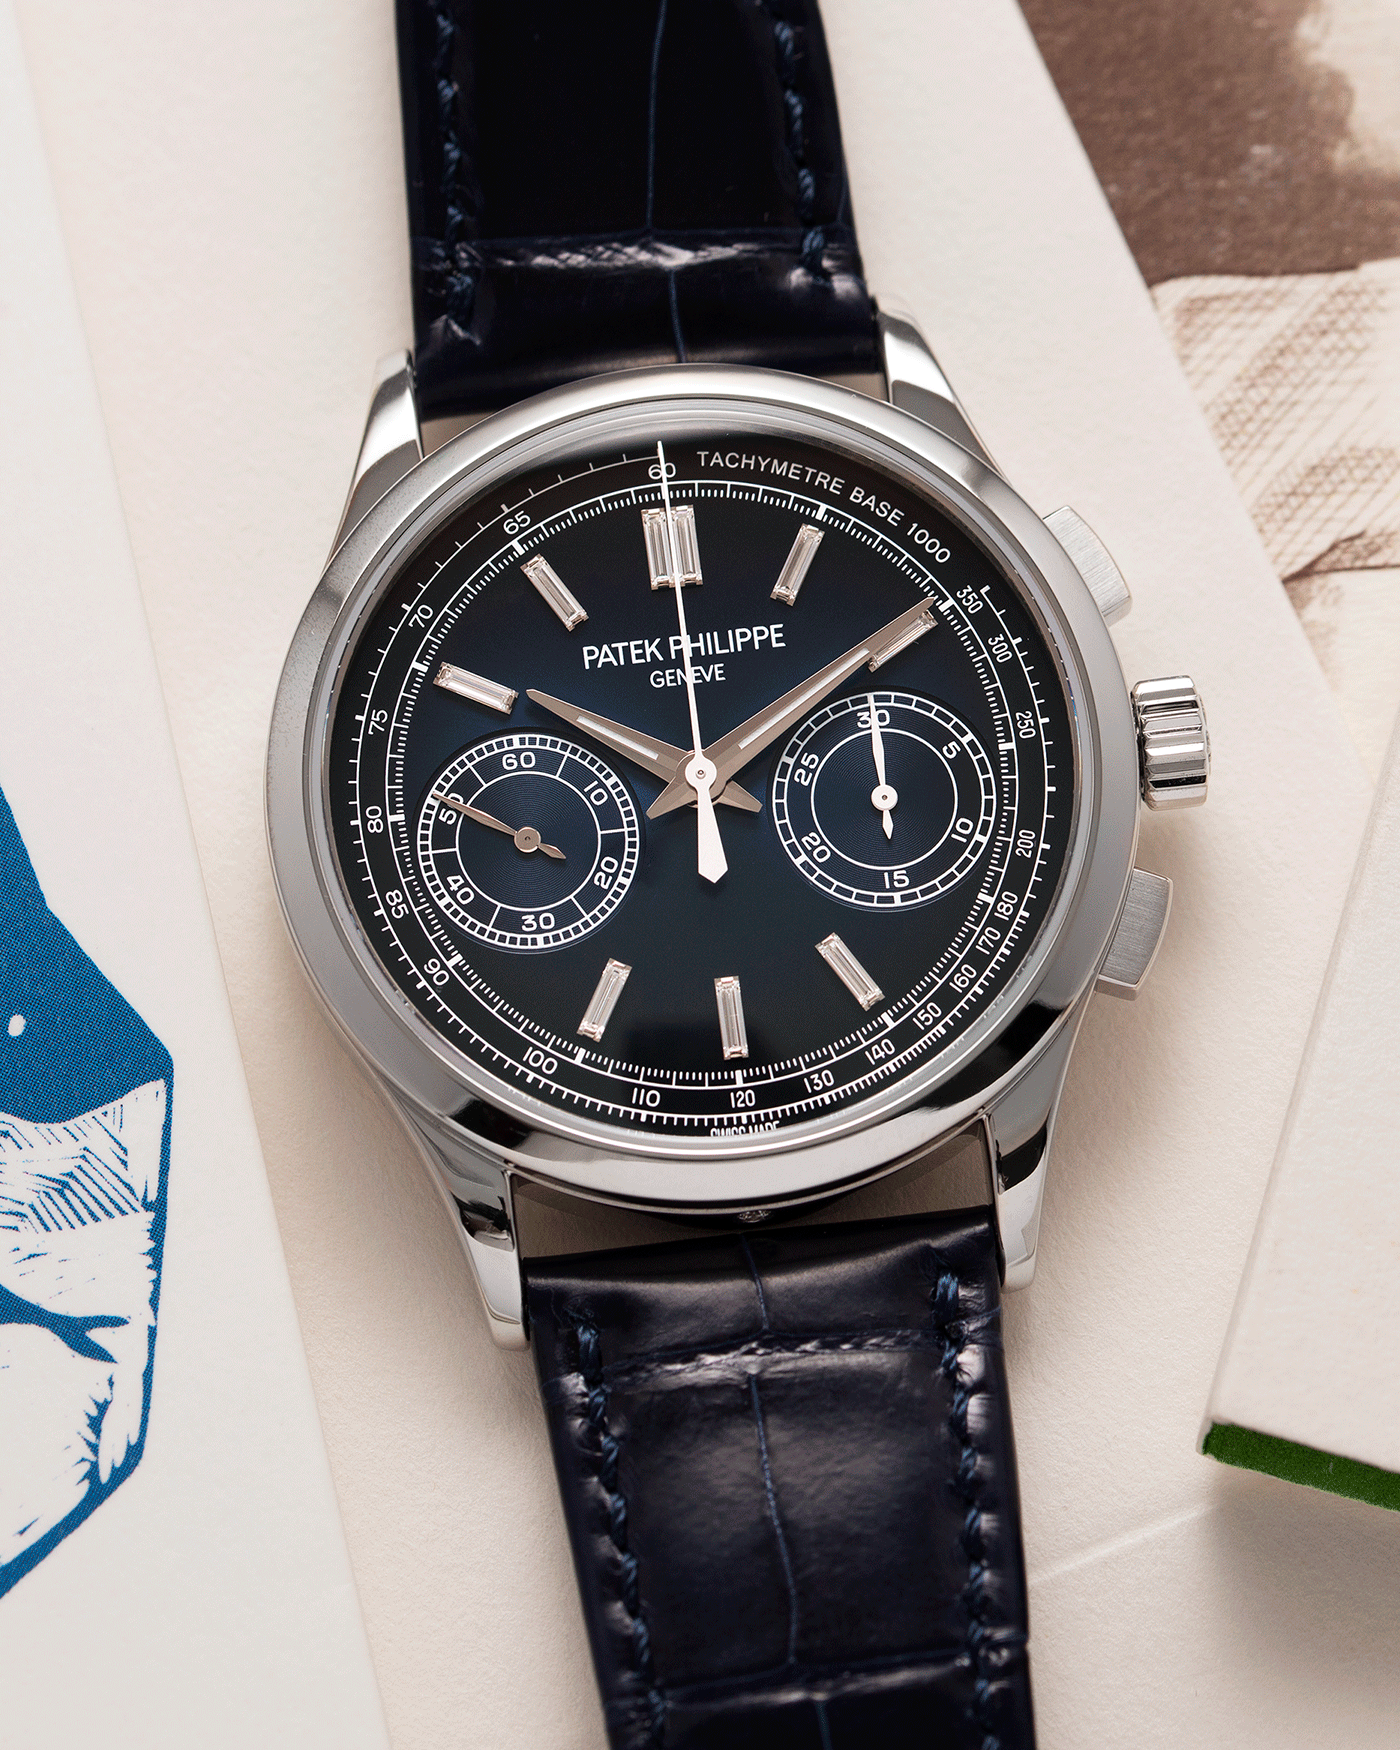 Brand: Patek Philippe Year: 2019 Model: Chronograph Reference Number: 5170P Material: Platinum Movement: In-House Caliber CH 29-535 PS Case Diameter: 39.4mm Bracelet: Nostime Patek Philippe Blue Alligator Strap with Platinum Deployant Clasp